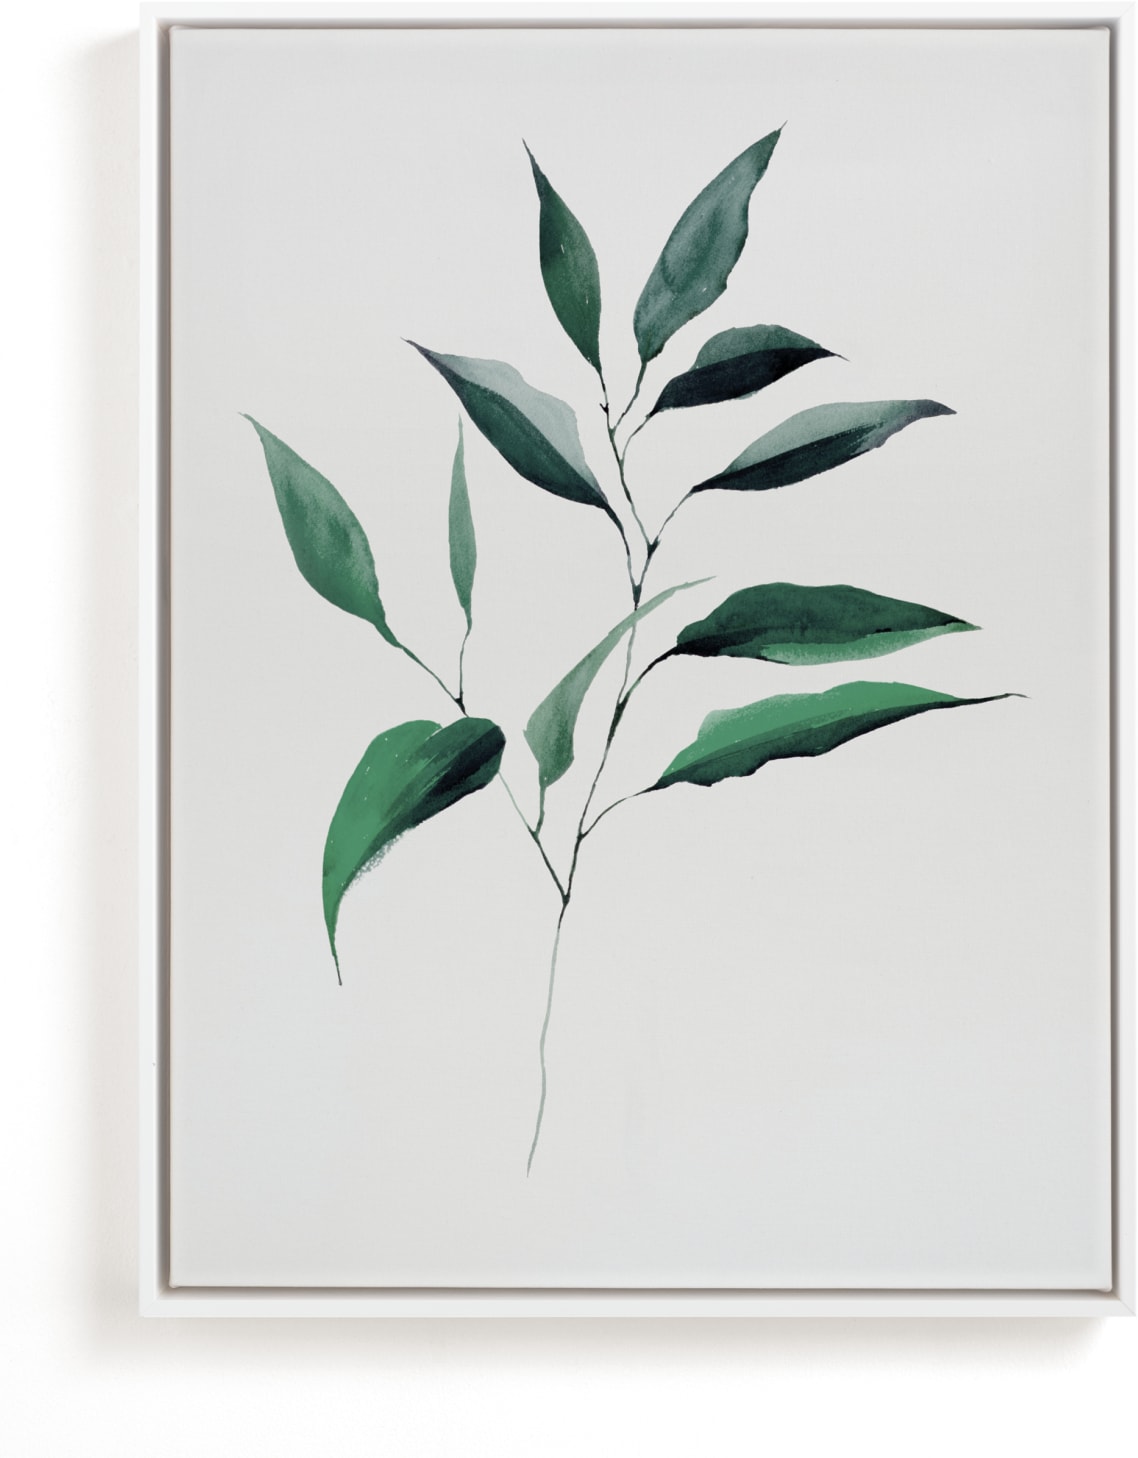 This is a ivory, green art by jinseikou called Magnolia Foliage.